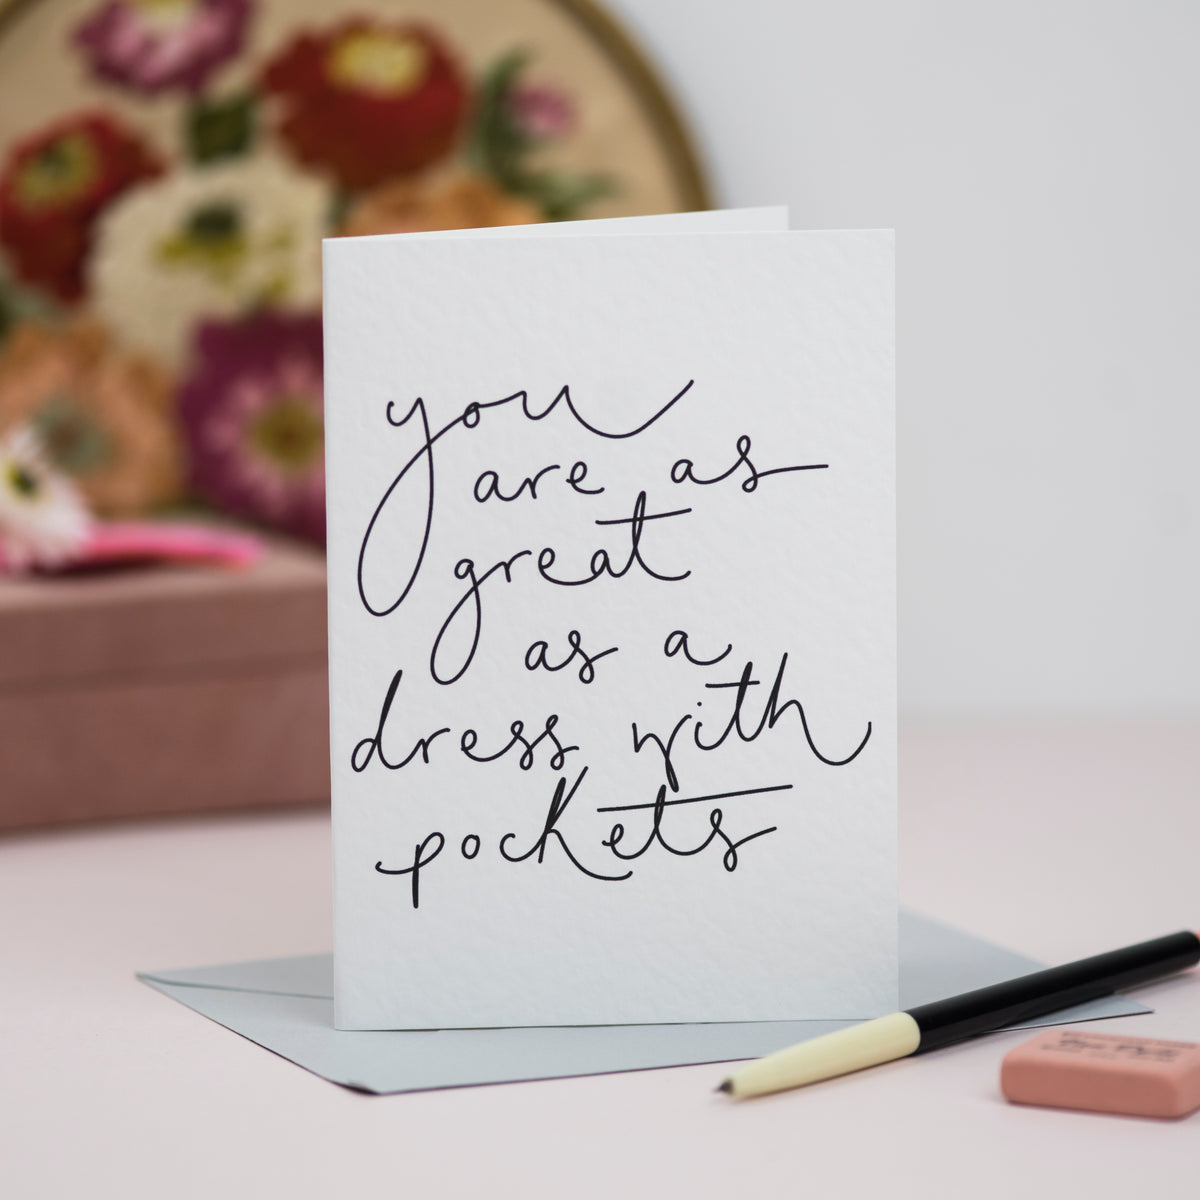 'You Are As Great as a Dress With Pockets' Hand Lettered Card